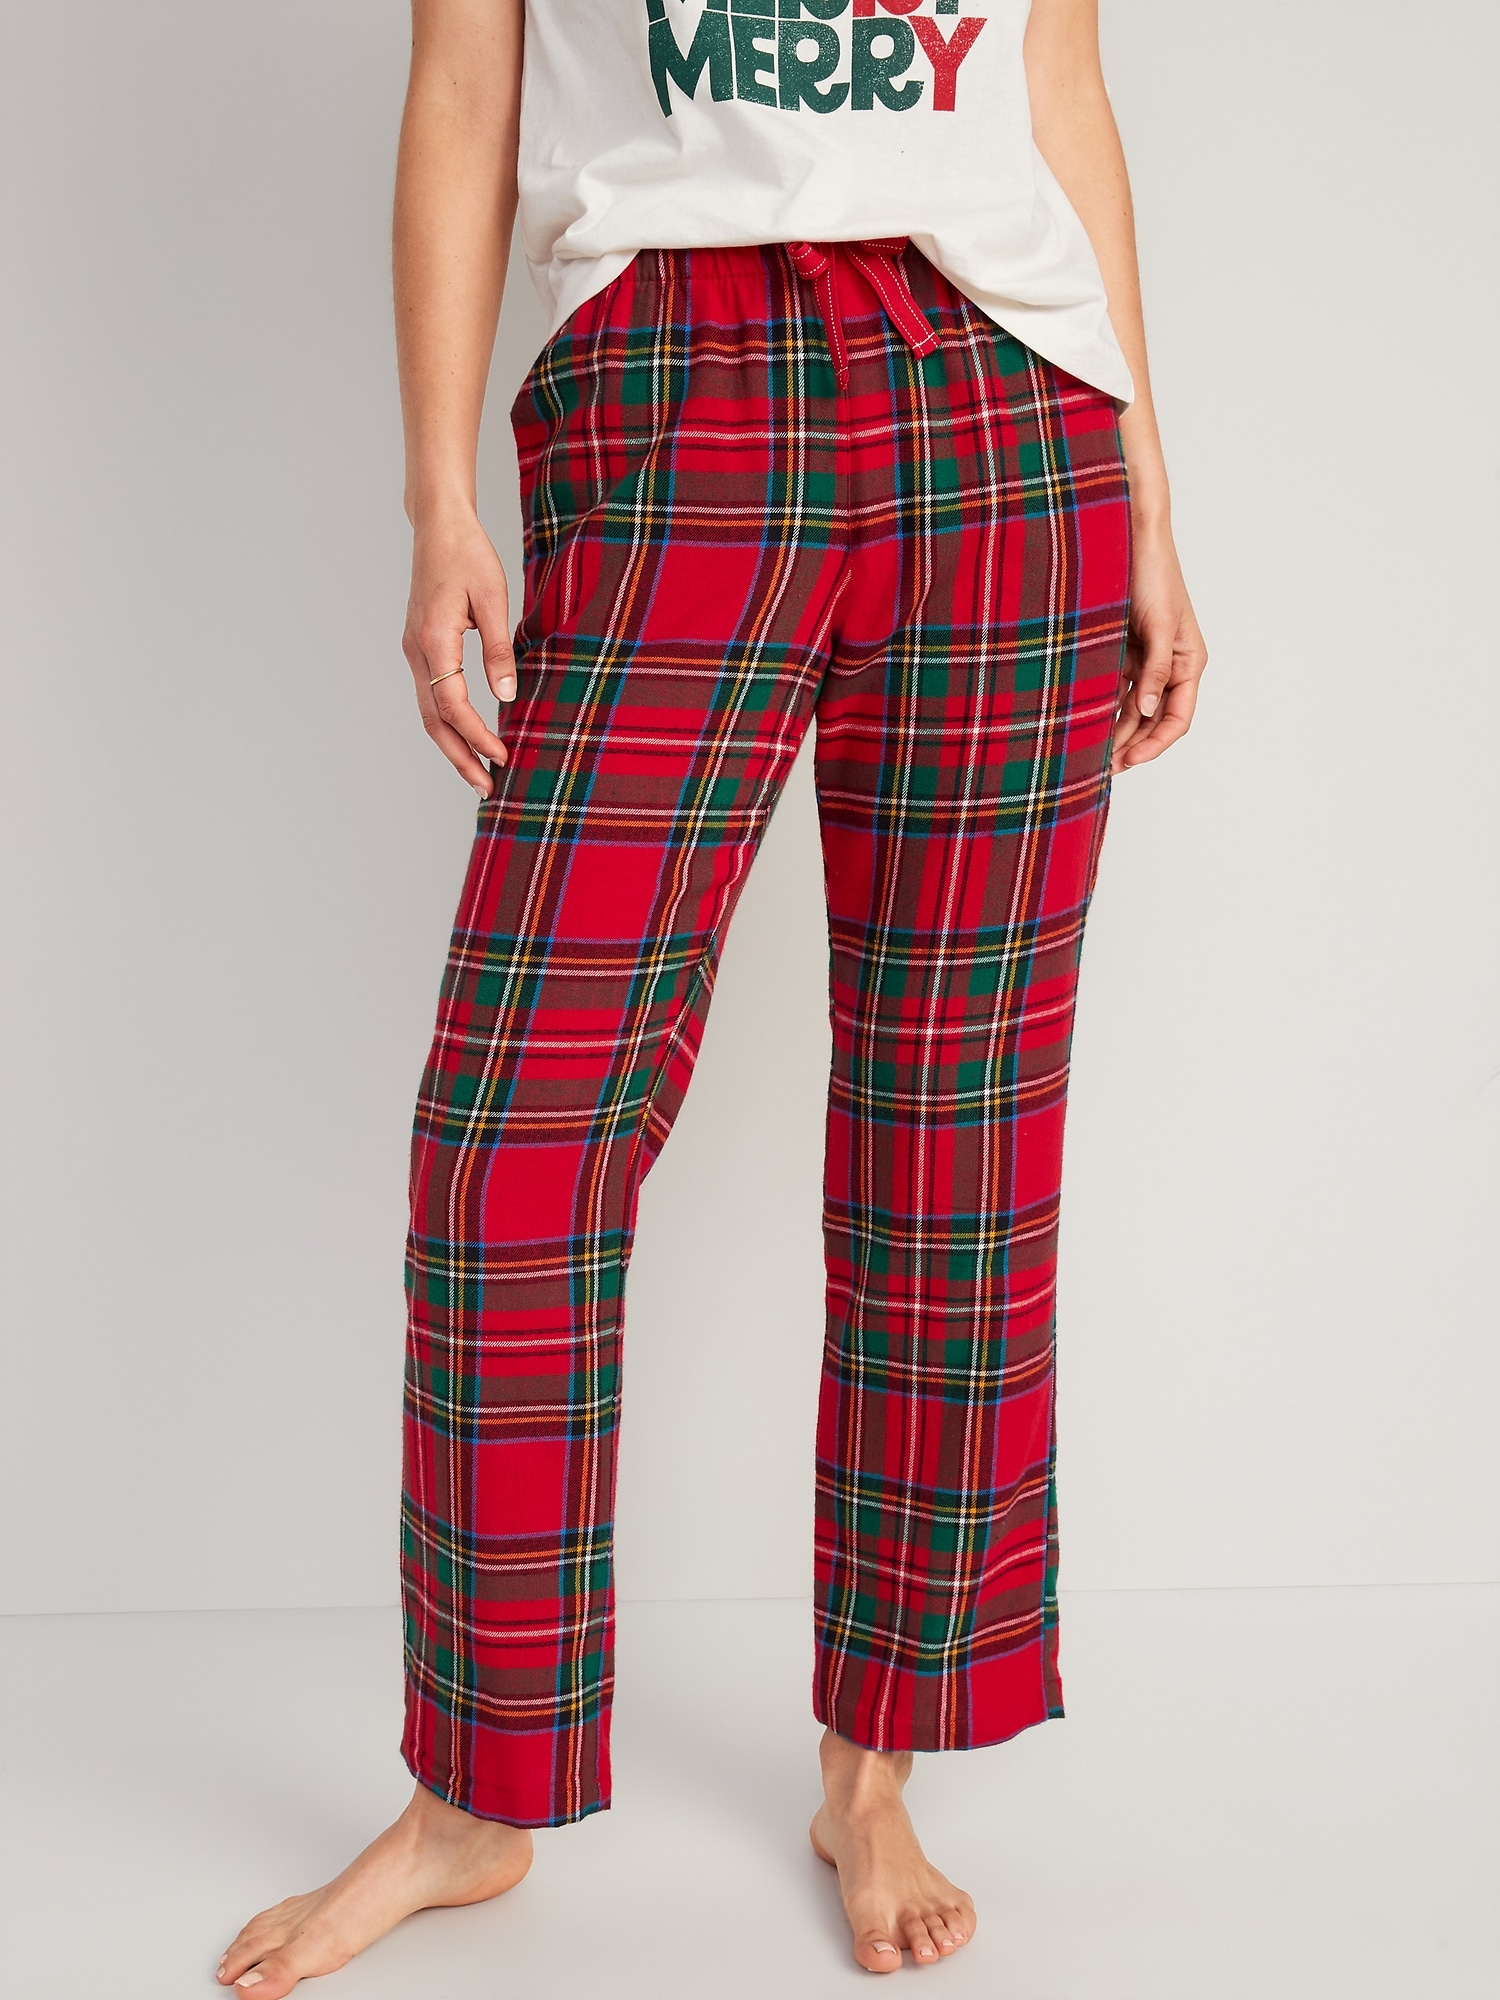 Old Navy Mid-Rise Printed Flannel Pajama Pants for Women red. 1